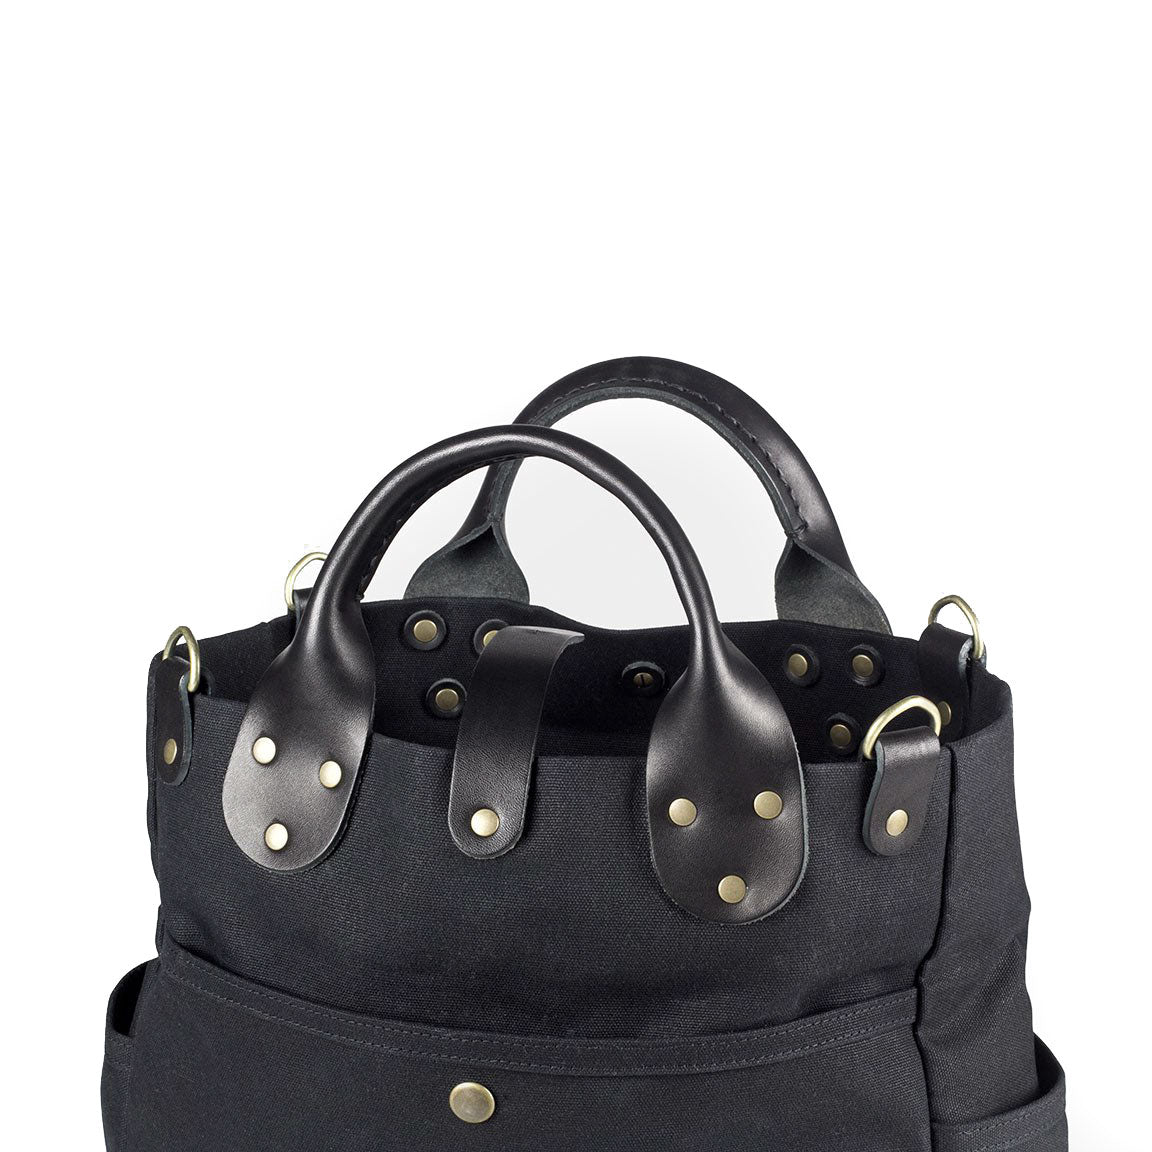 Carryall Black Waxed Canvas & Black Leather